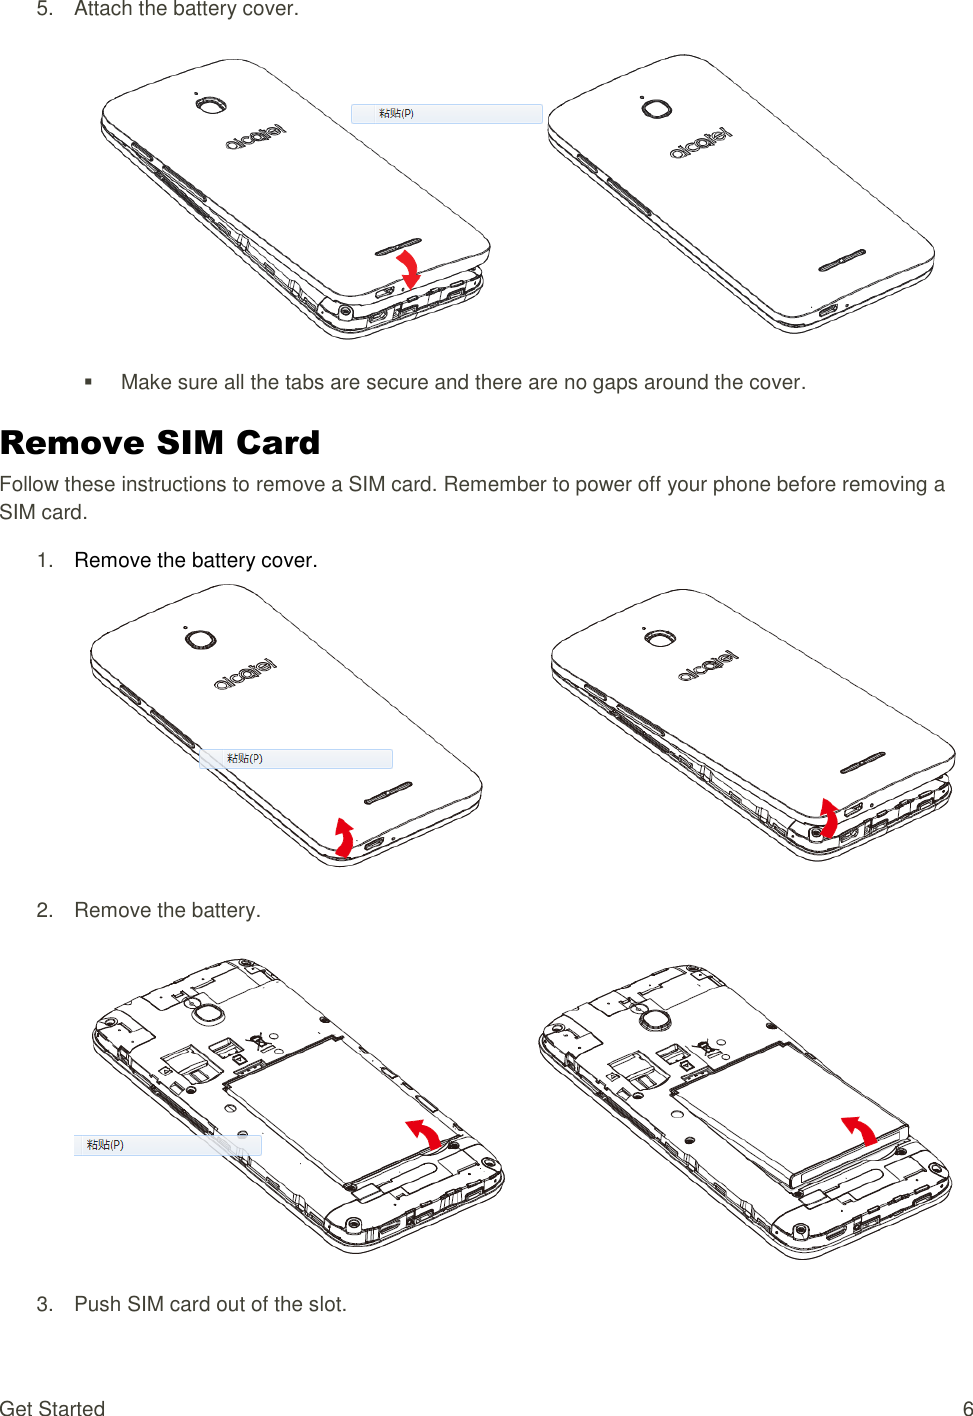 Get Started  6 5.  Attach the battery cover.     Make sure all the tabs are secure and there are no gaps around the cover. Remove SIM Card Follow these instructions to remove a SIM card. Remember to power off your phone before removing a SIM card. 1. Remove the battery cover.  2.  Remove the battery.  3.  Push SIM card out of the slot. 